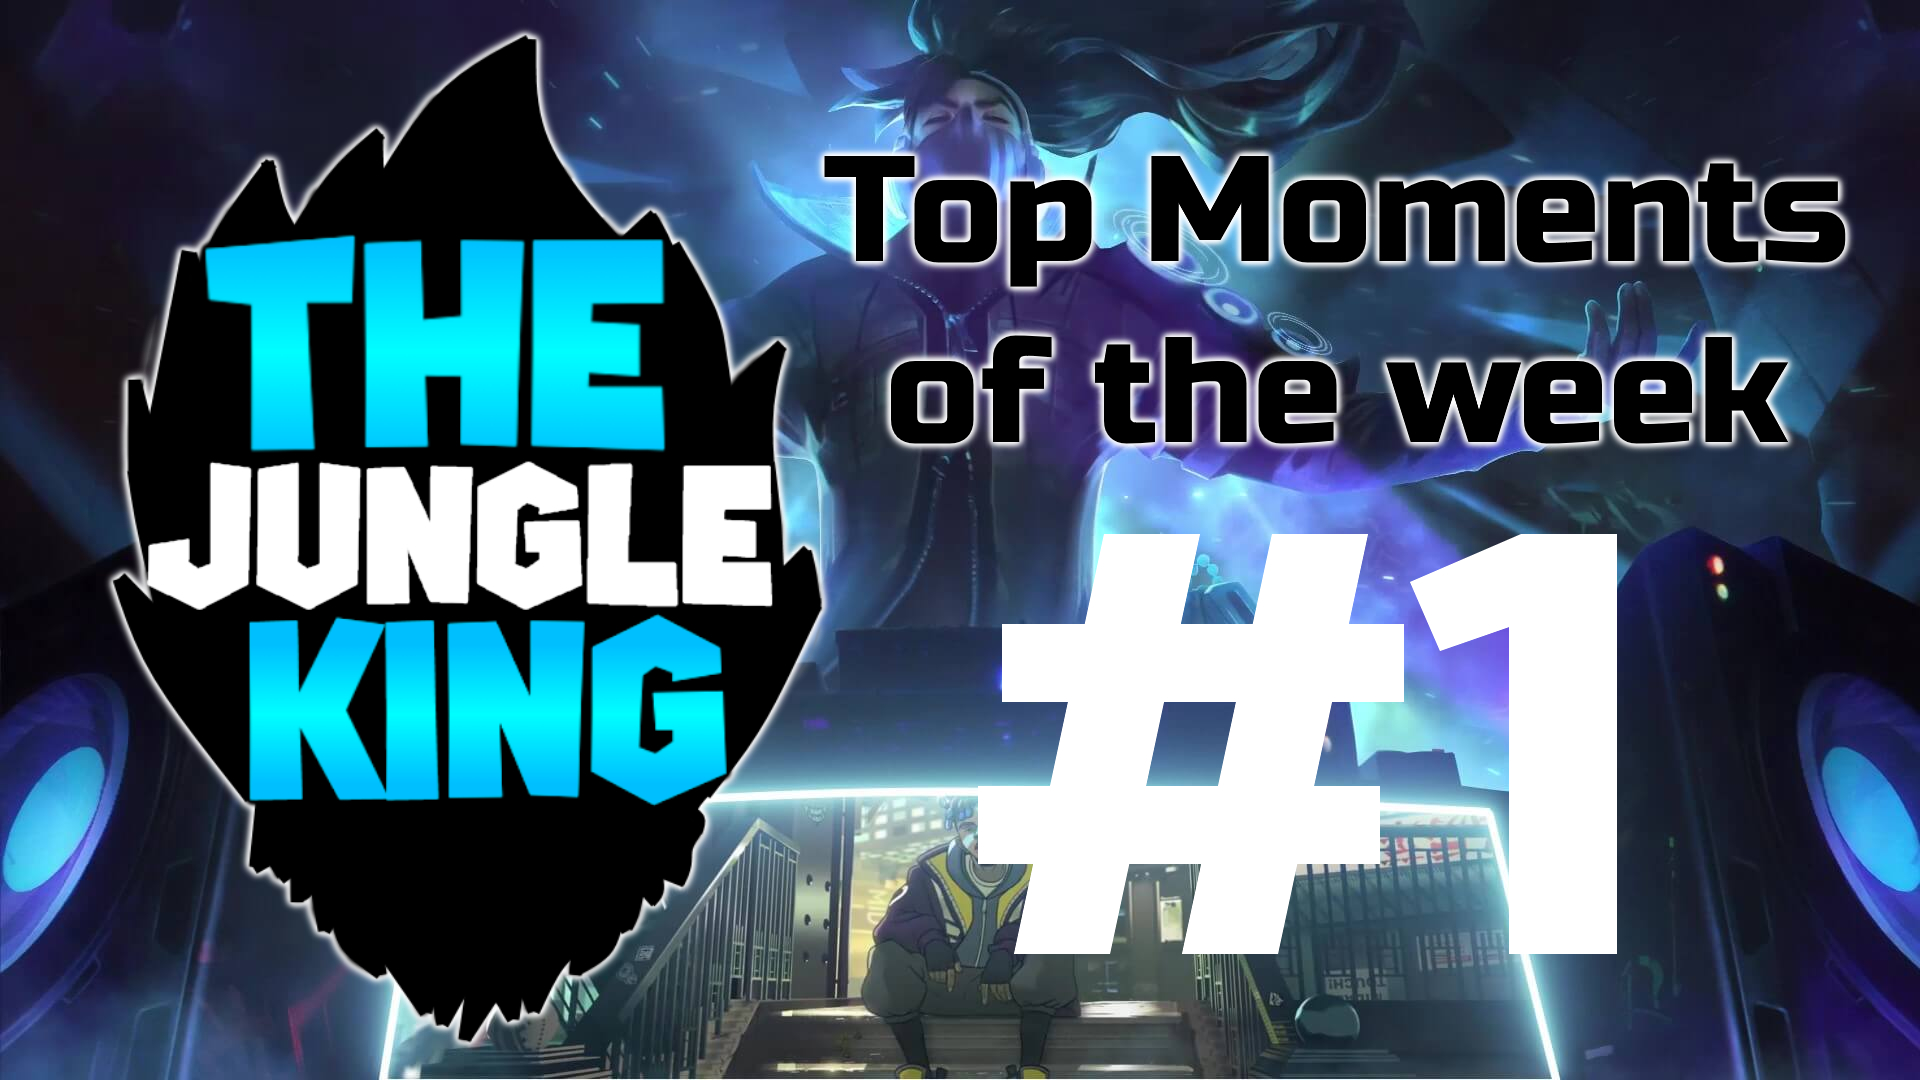 LoL Top moments & Highlights of the week #1 (By PentaKing)